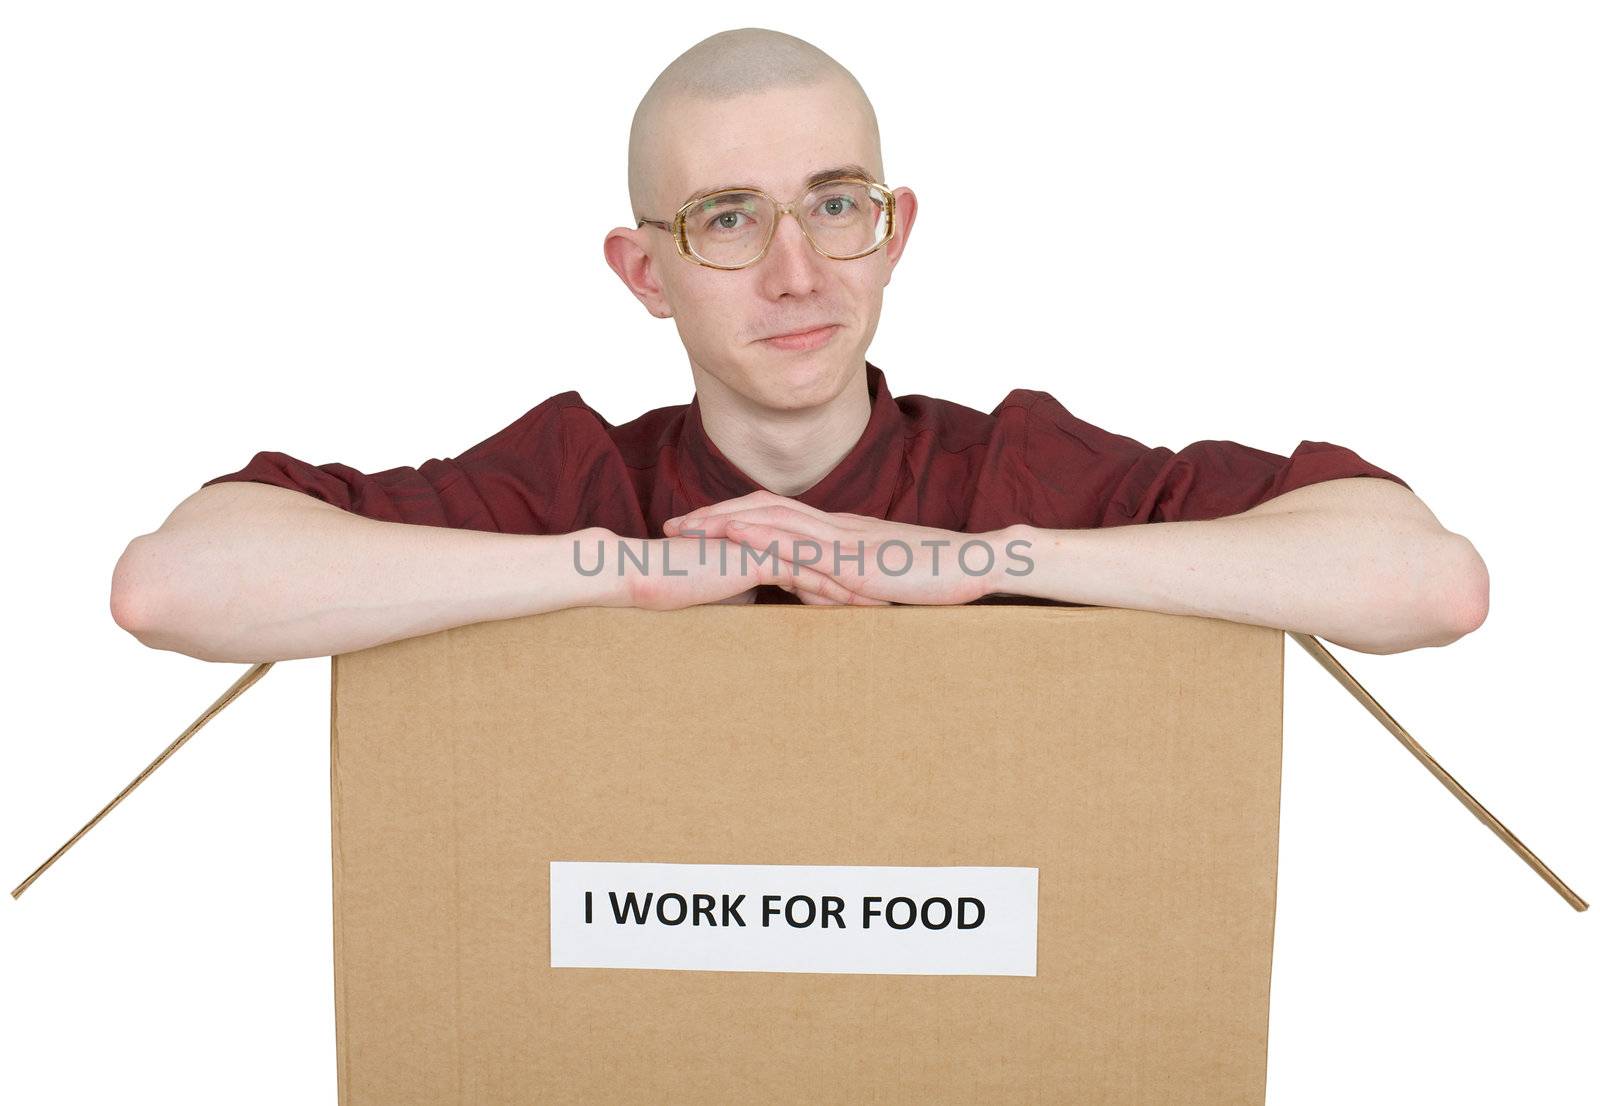 Man in carton box with inscription "I work for food"